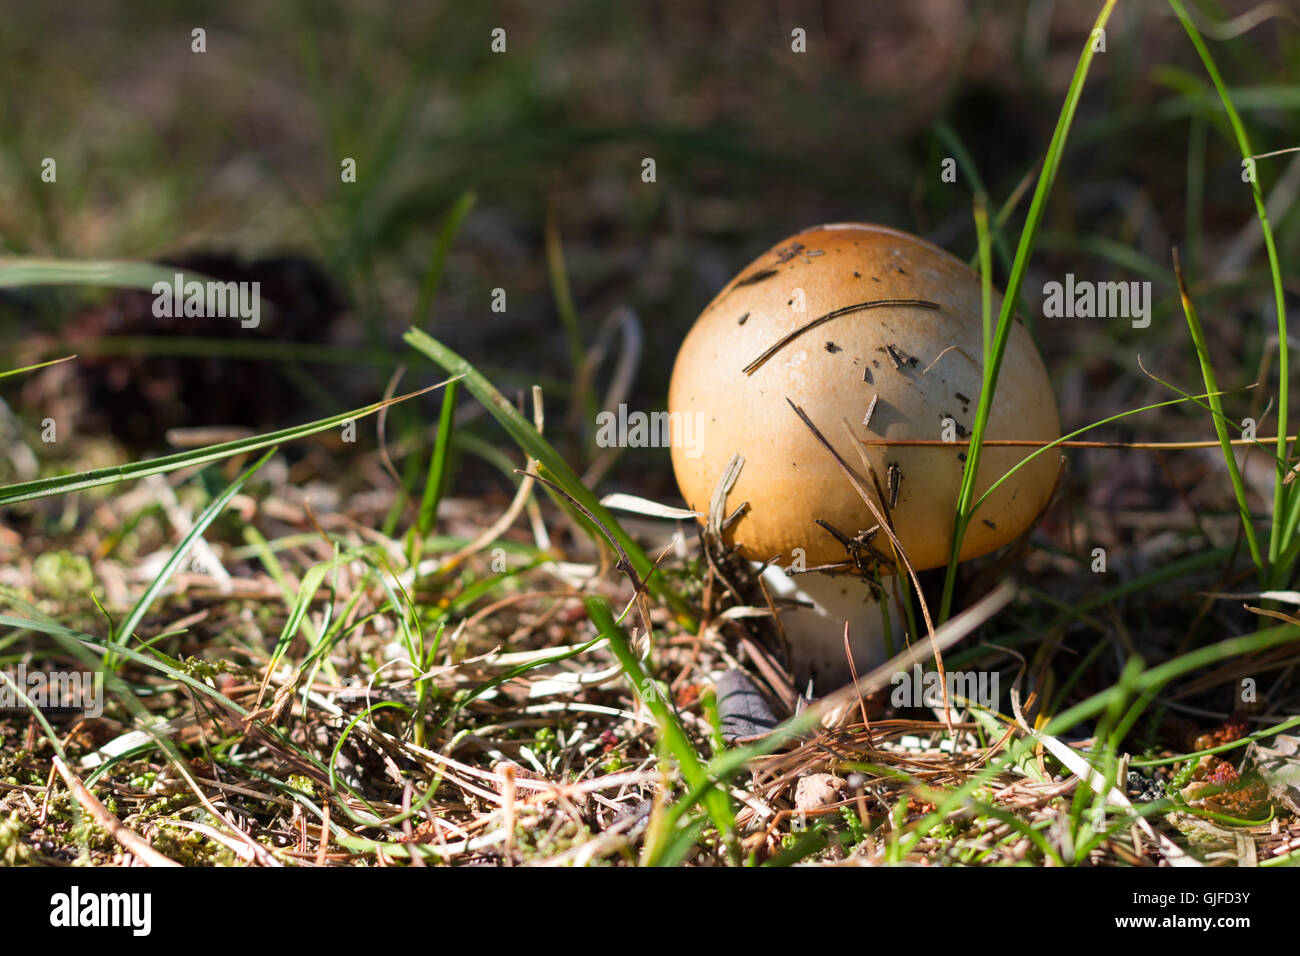 russula, mushroom with a yellow hat in the grass with leaf Stock Photo